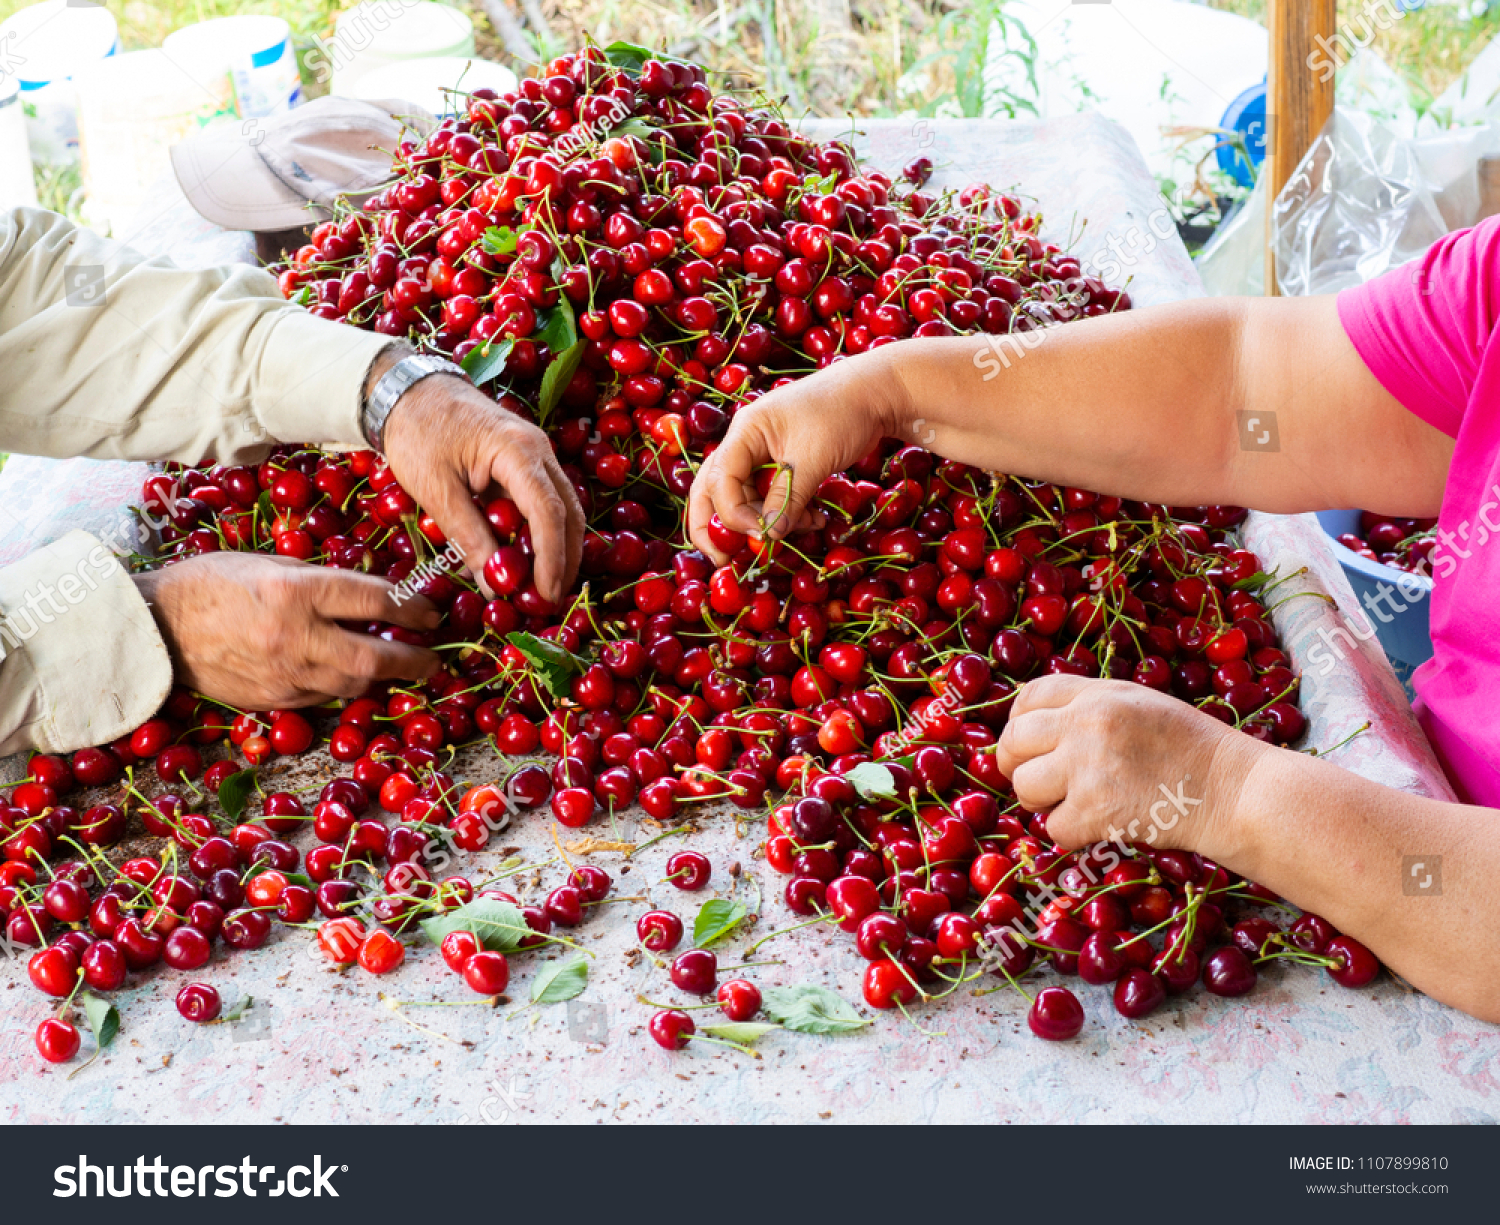 the workers are choosing cherry. fresh organic cherries background. Red fresh bunch of cherries on the table. fresh red cherry heap. cherry selective workers #1107899810